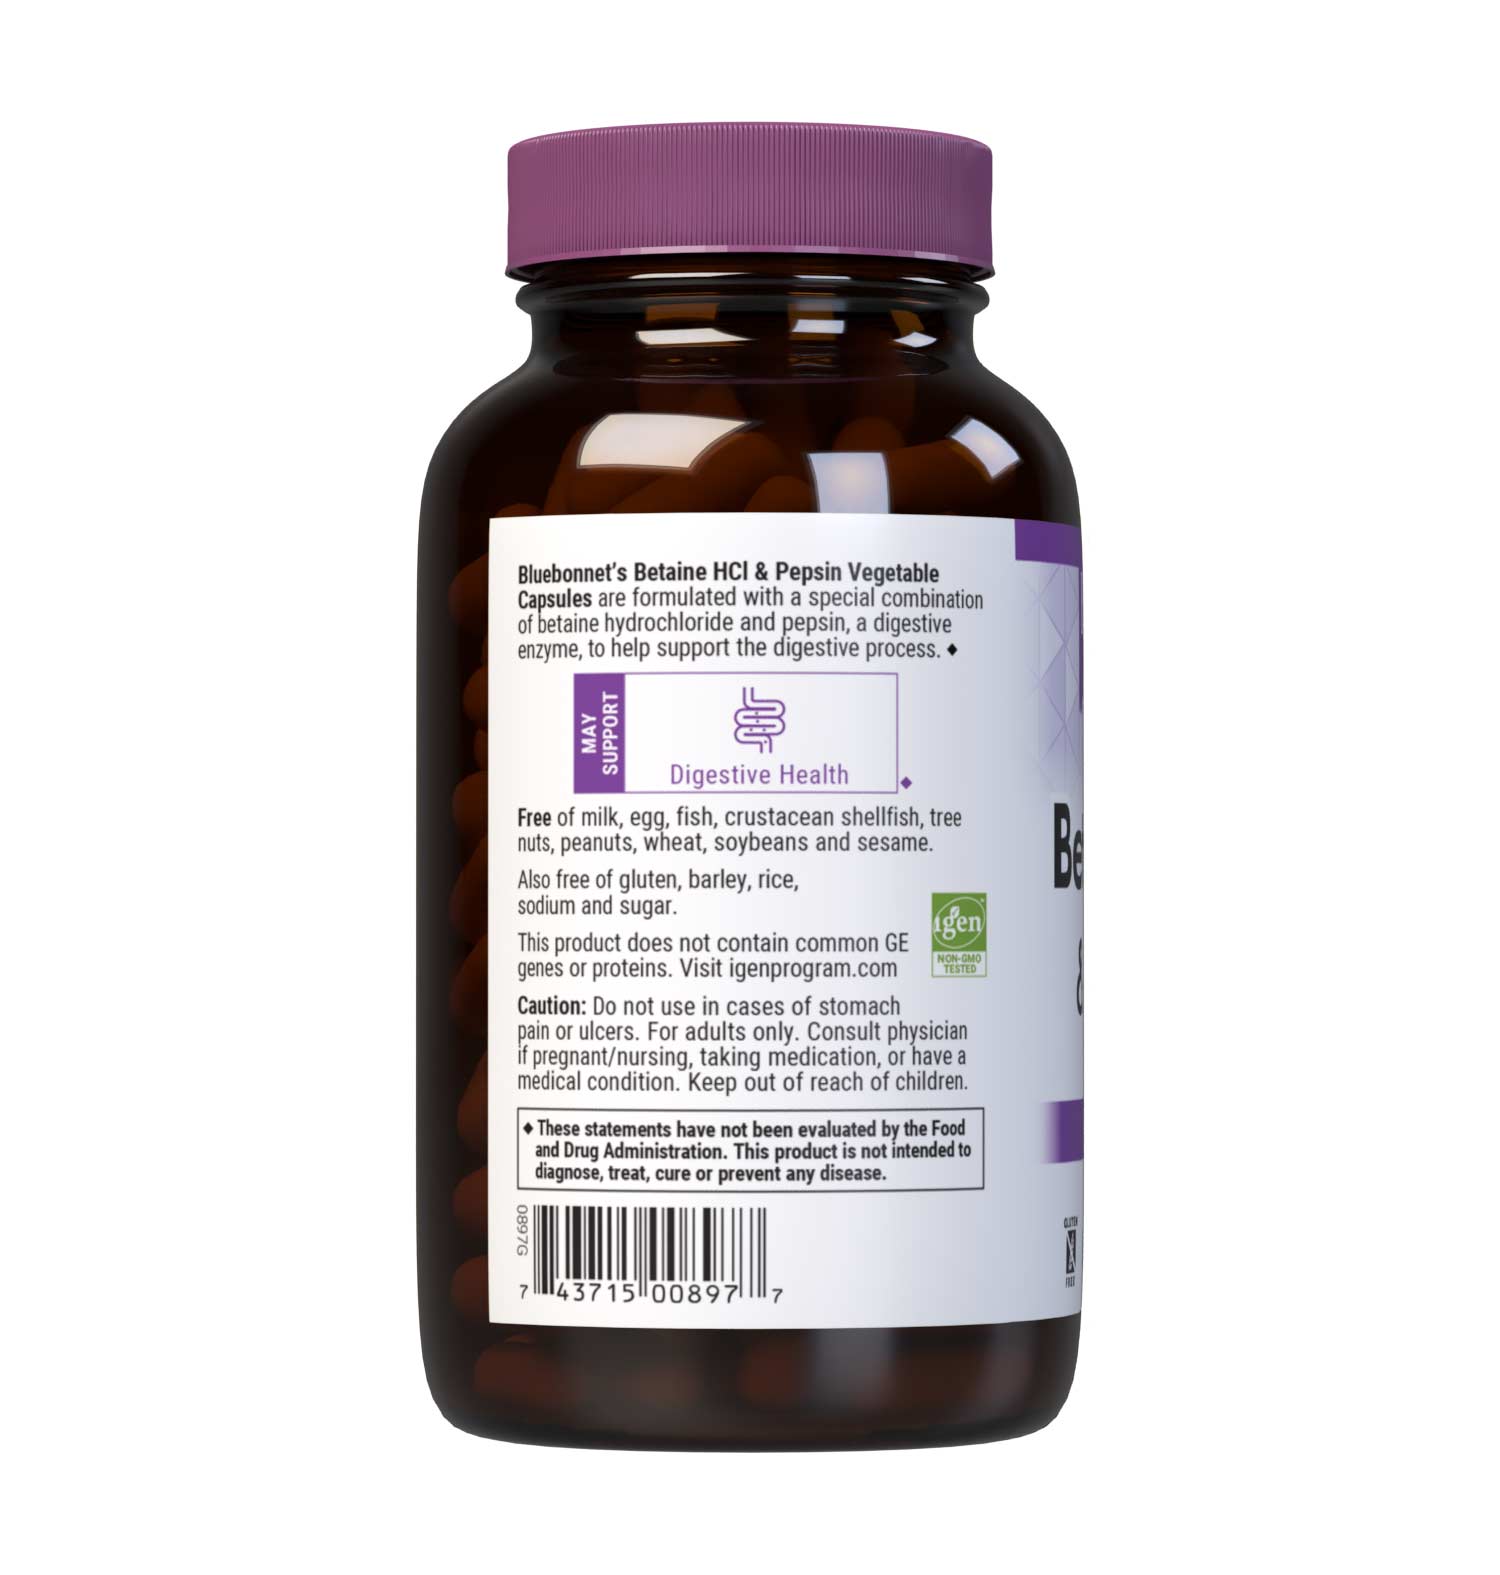 Bluebonnet’s Betaine HCl Plus Pepsin 180 Vegetable Capsules are formulated with a special combination of betaine hydrochloride and pepsin, a digestive enzyme. Description panel. #size_180 count